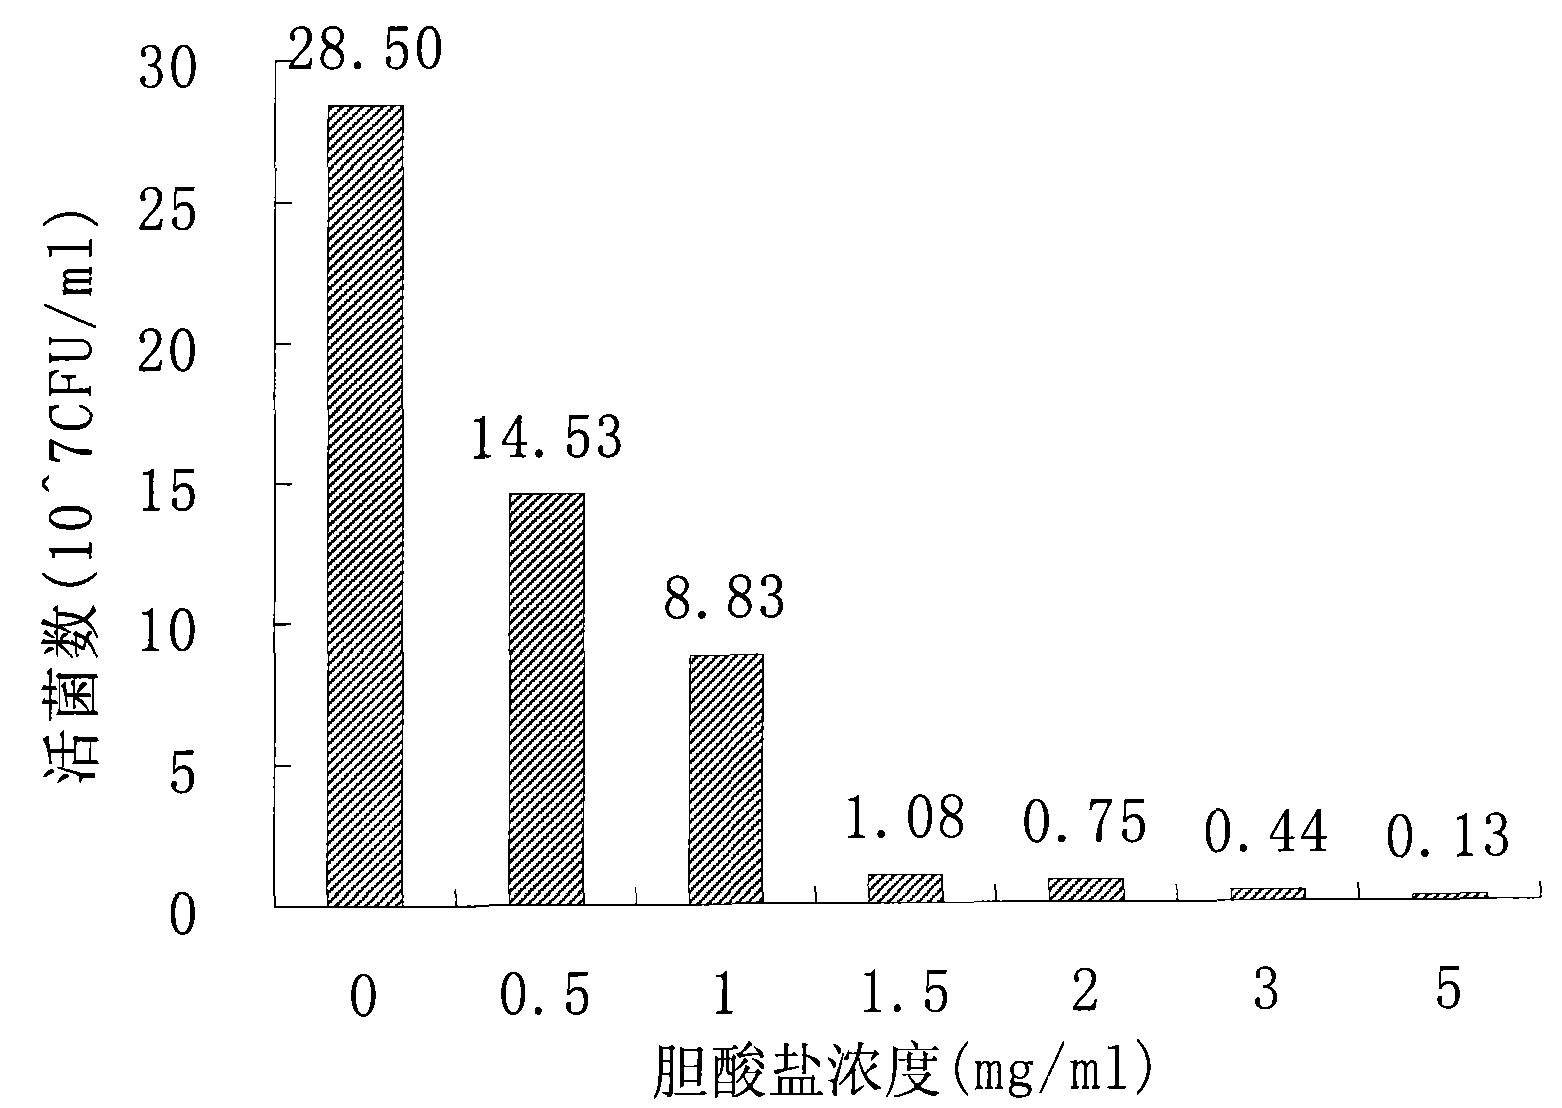 New strain of bifidobacterium and fermentative preparation method and application thereof